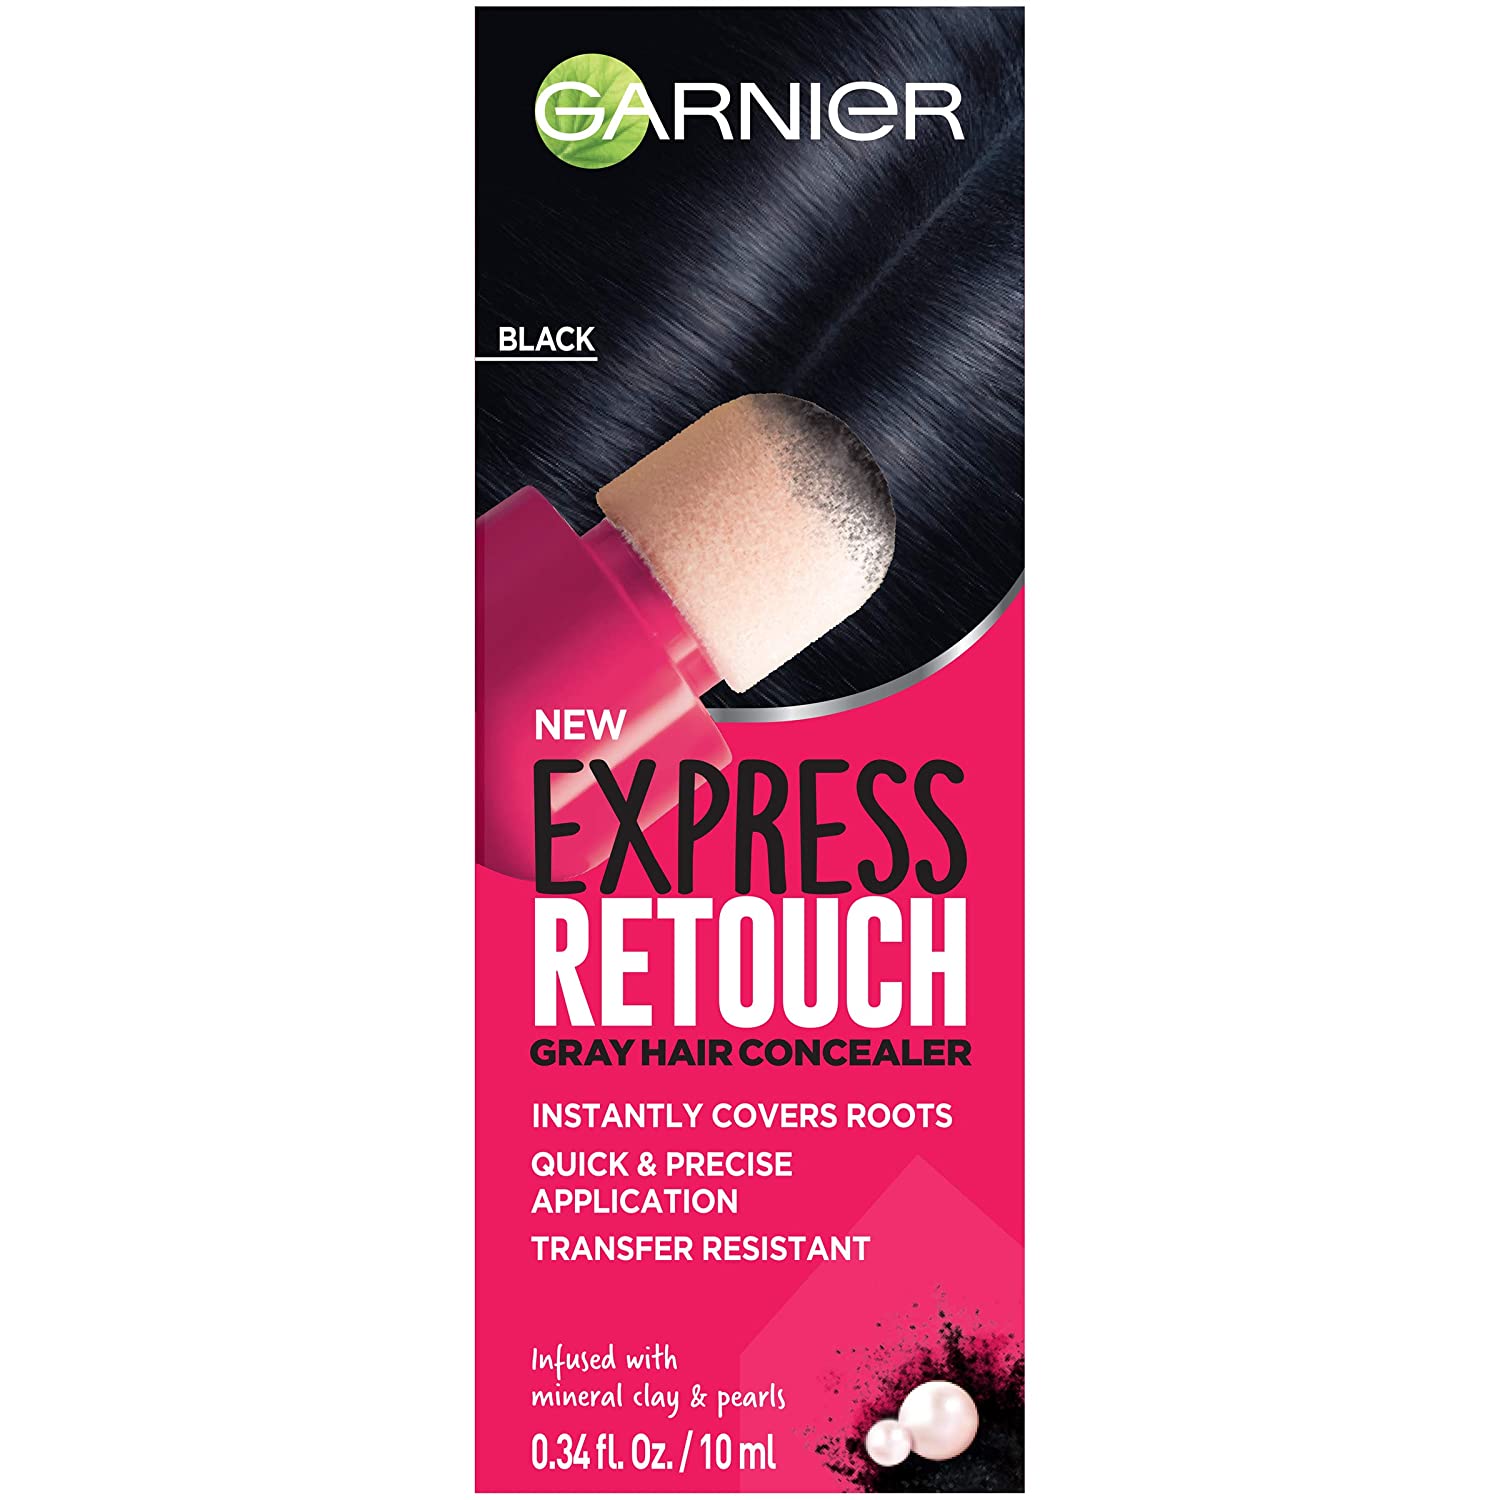 ''Garnier HAIR Color Express Retouch Gray HAIR Concealer, Instant Gray Coverage, Black, 1 Count''